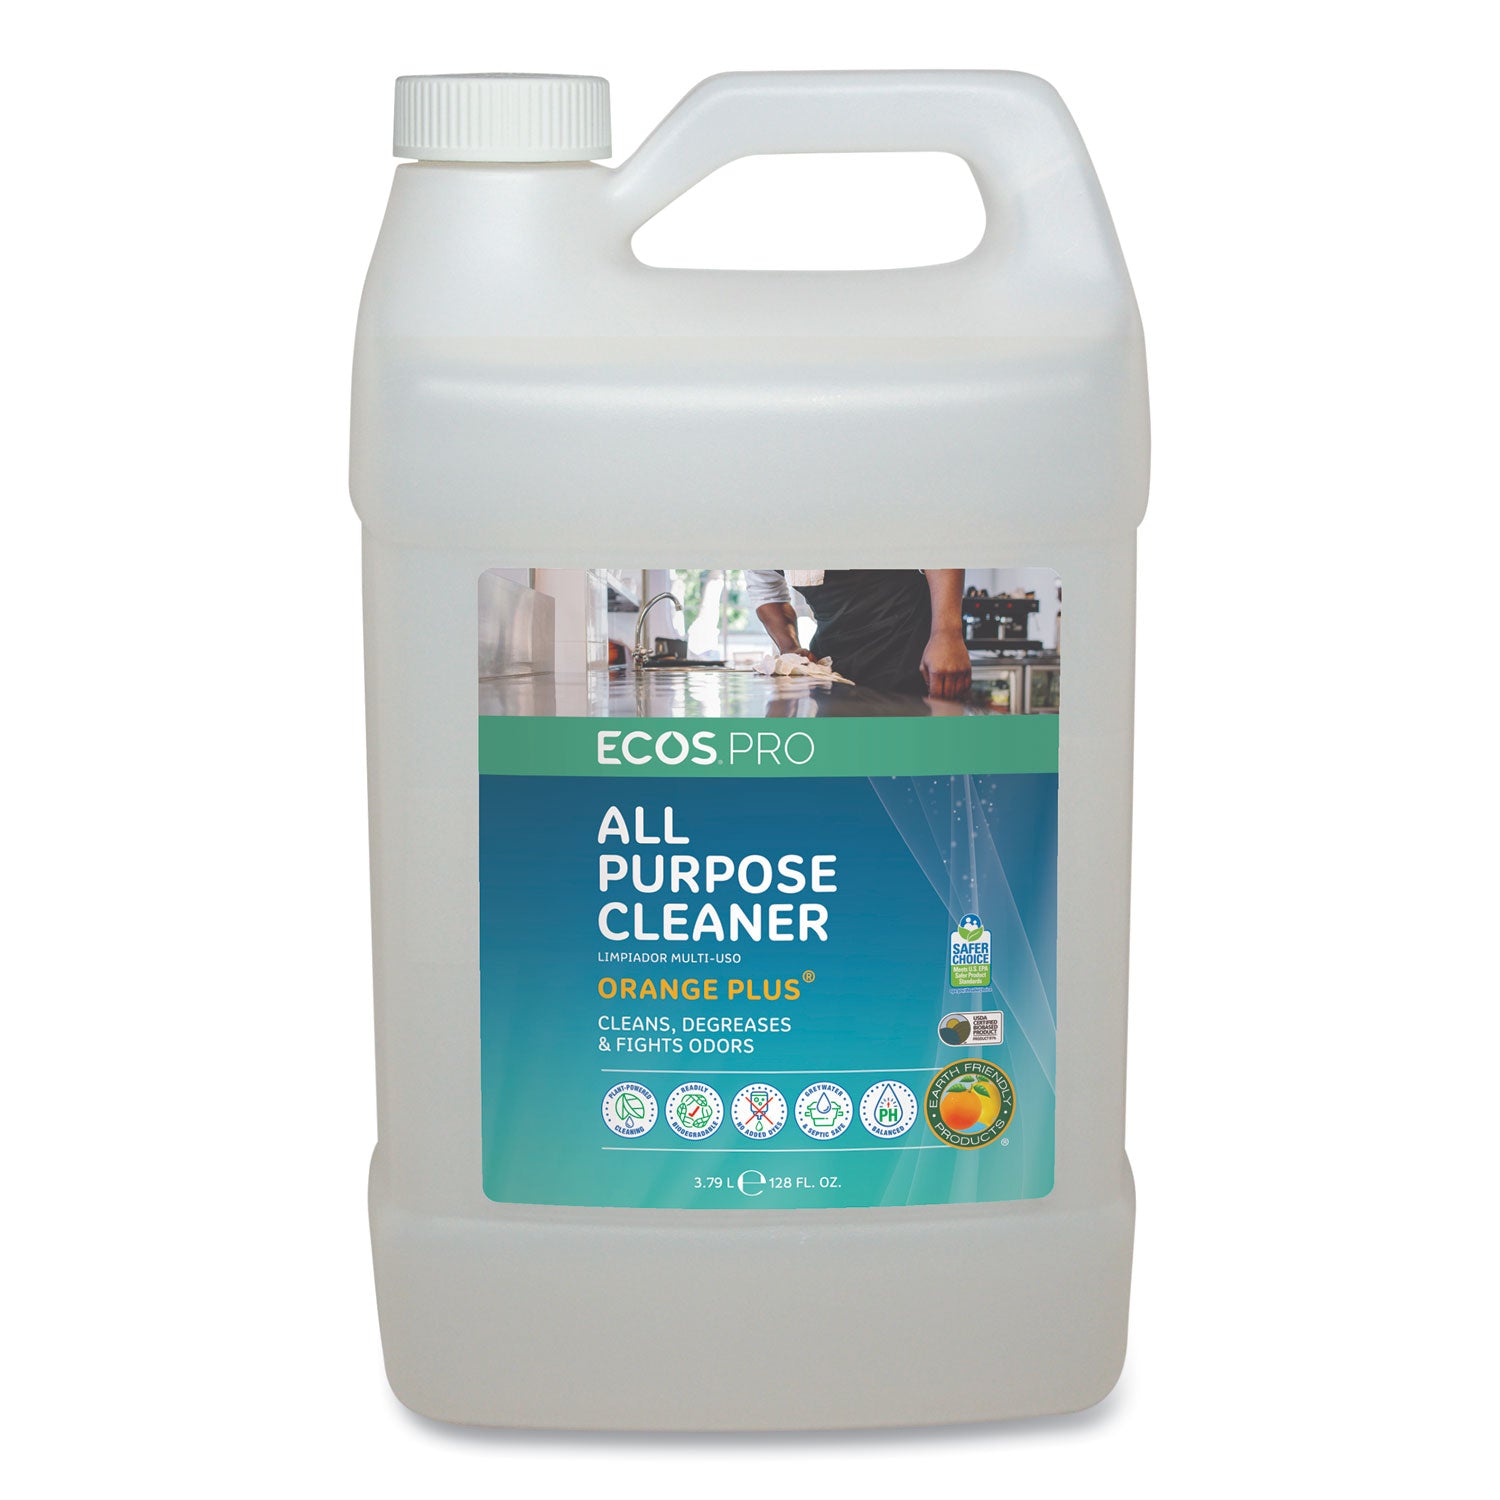 orange-plus-all-purpose-cleaner-and-degreaser-citrus-scent-1-gal-bottle_eoppl970604 - 1